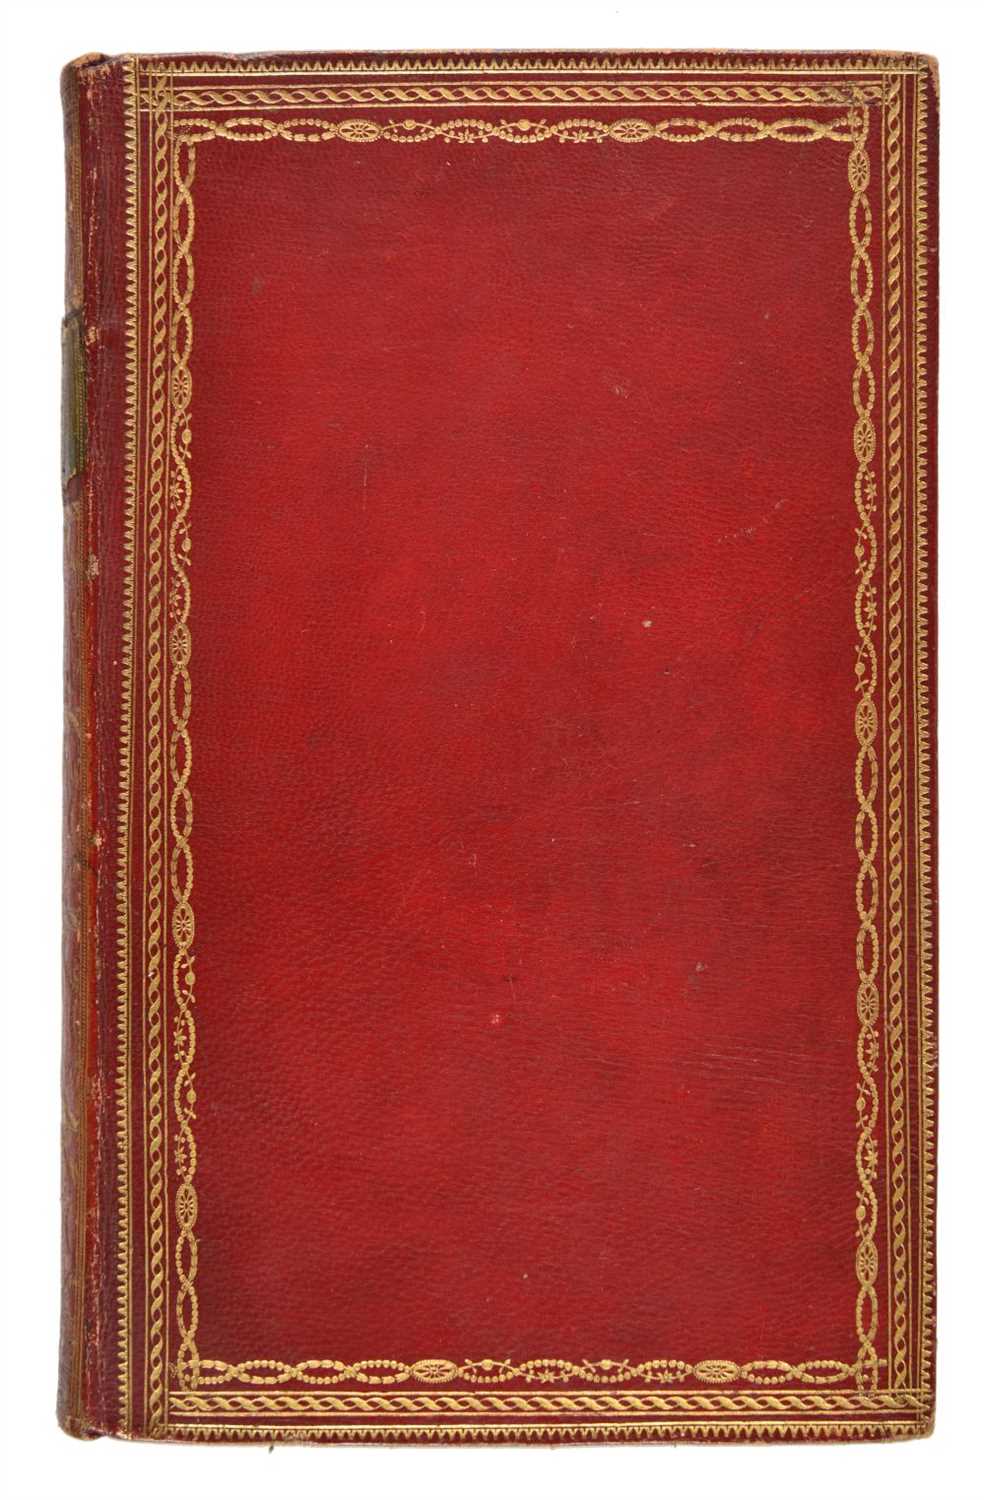 Lot 306 - Army Lists. A List of the General and Field Officers, 6 volumes, 1768-1817